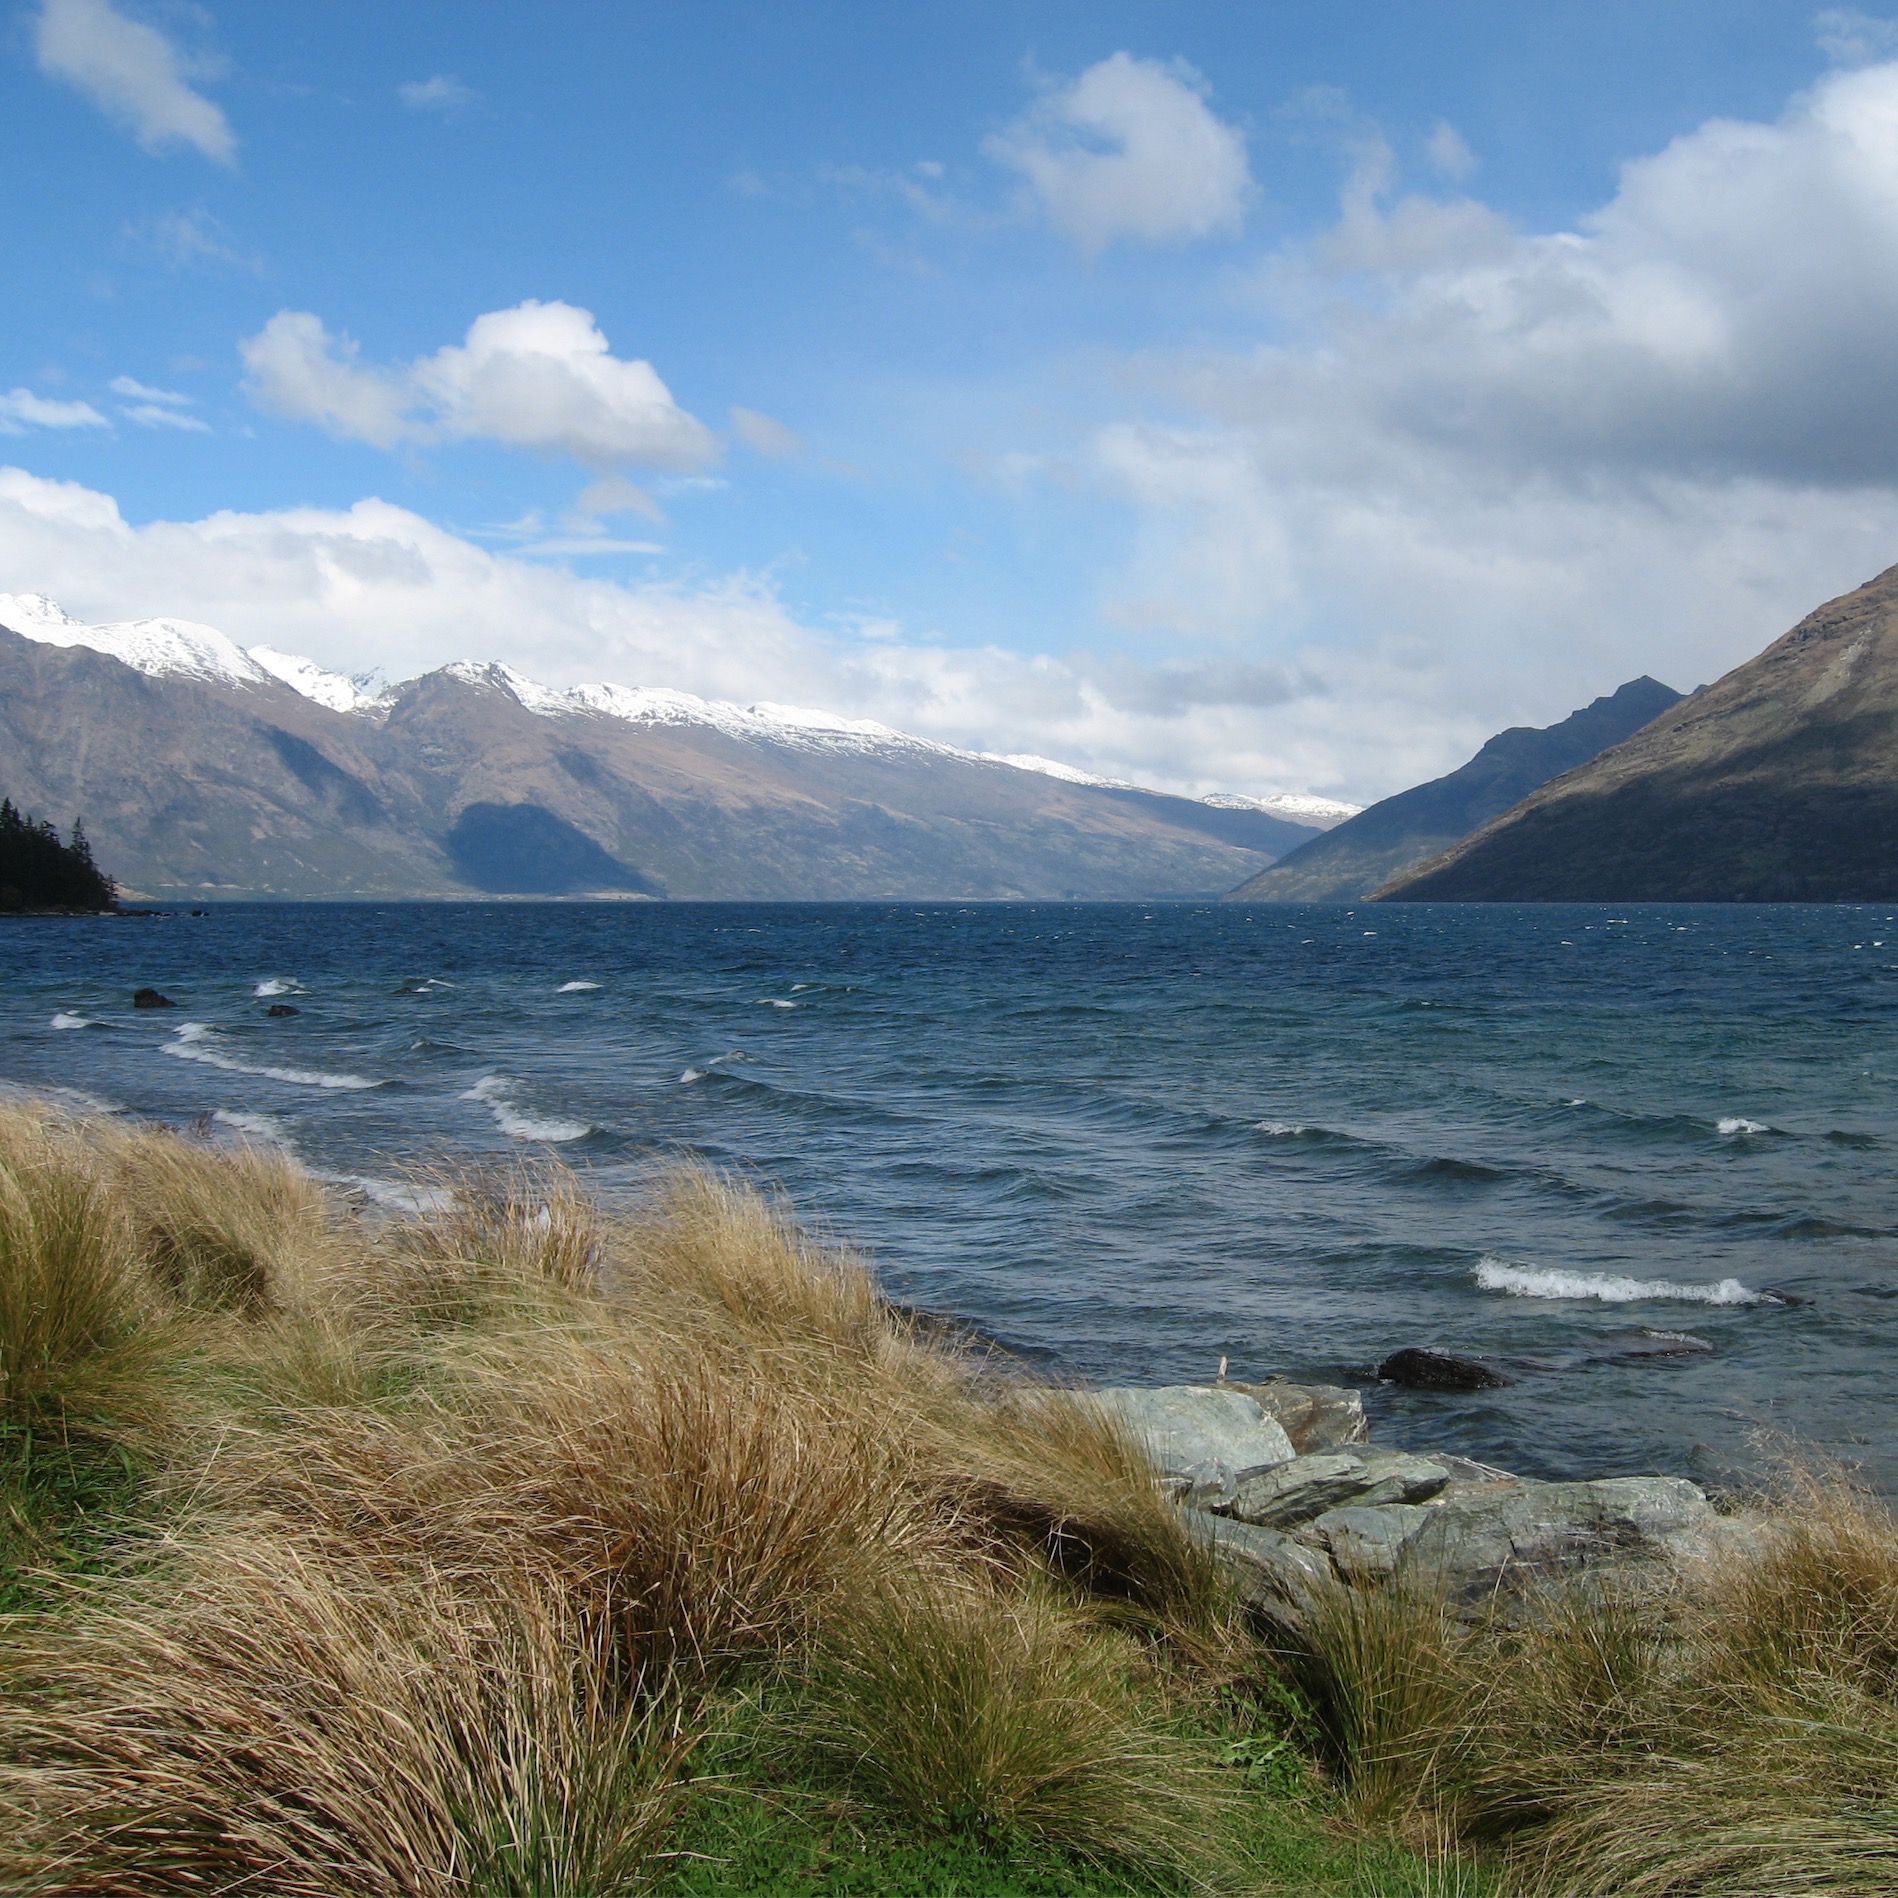 A lake in New Zealand, aquamarine blue, with whitecaps on the water, surrounded by mountains